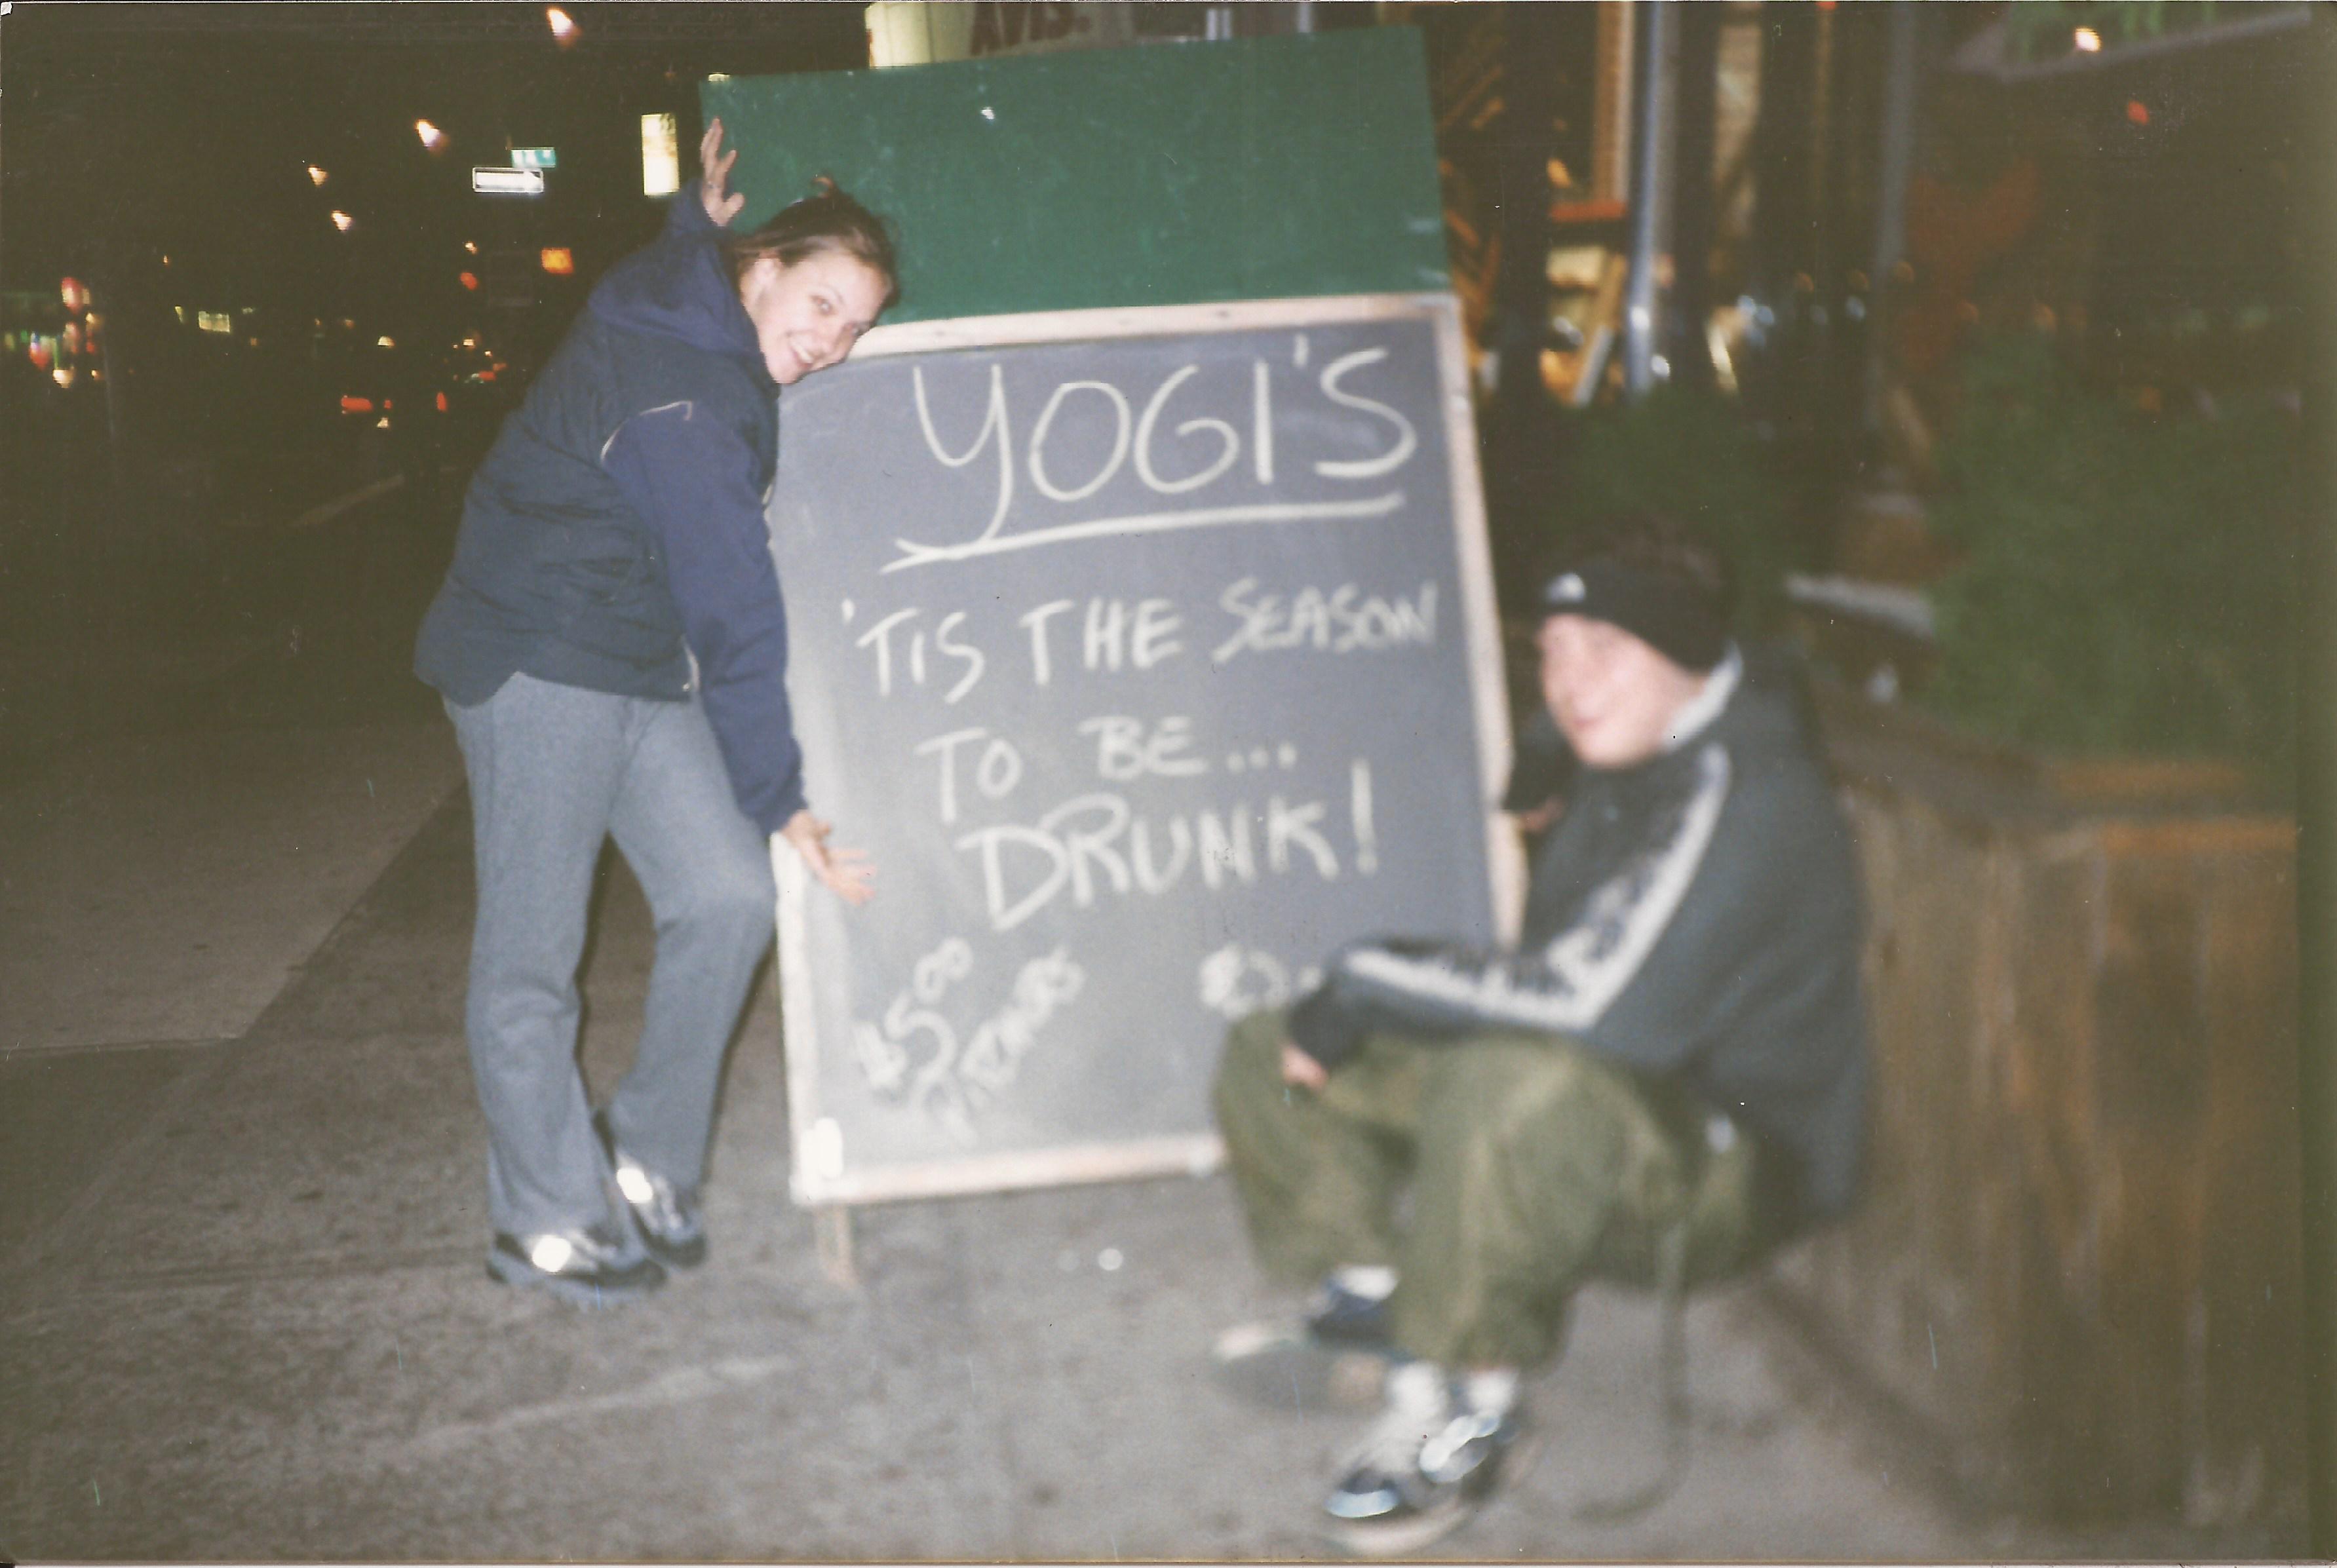 Another old UWS bar gone by the wayside. RIP Yogi's.